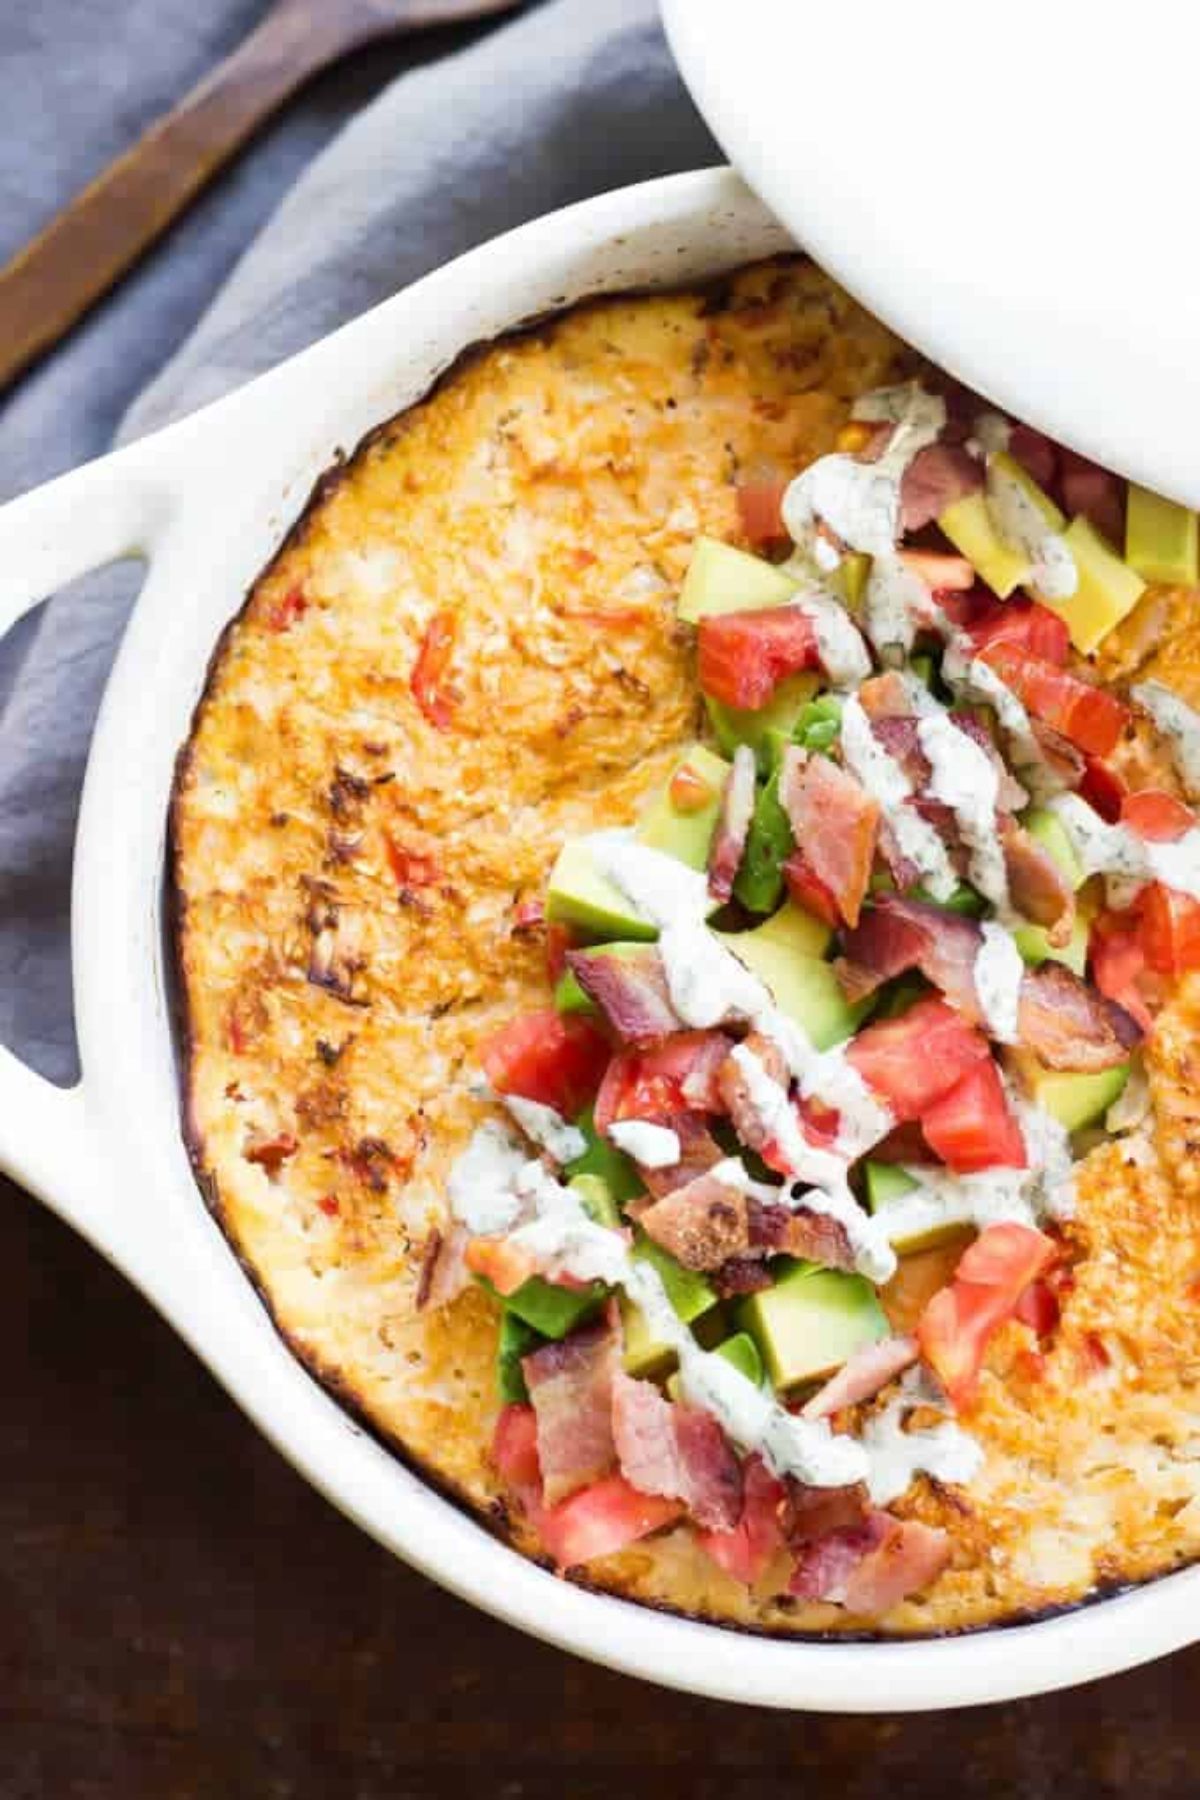 on a pale blue cloth is a white casserole dish, with the lid partially covering it. Inside is a cheesey casserole topped with chopped bacon, avocado and tomato